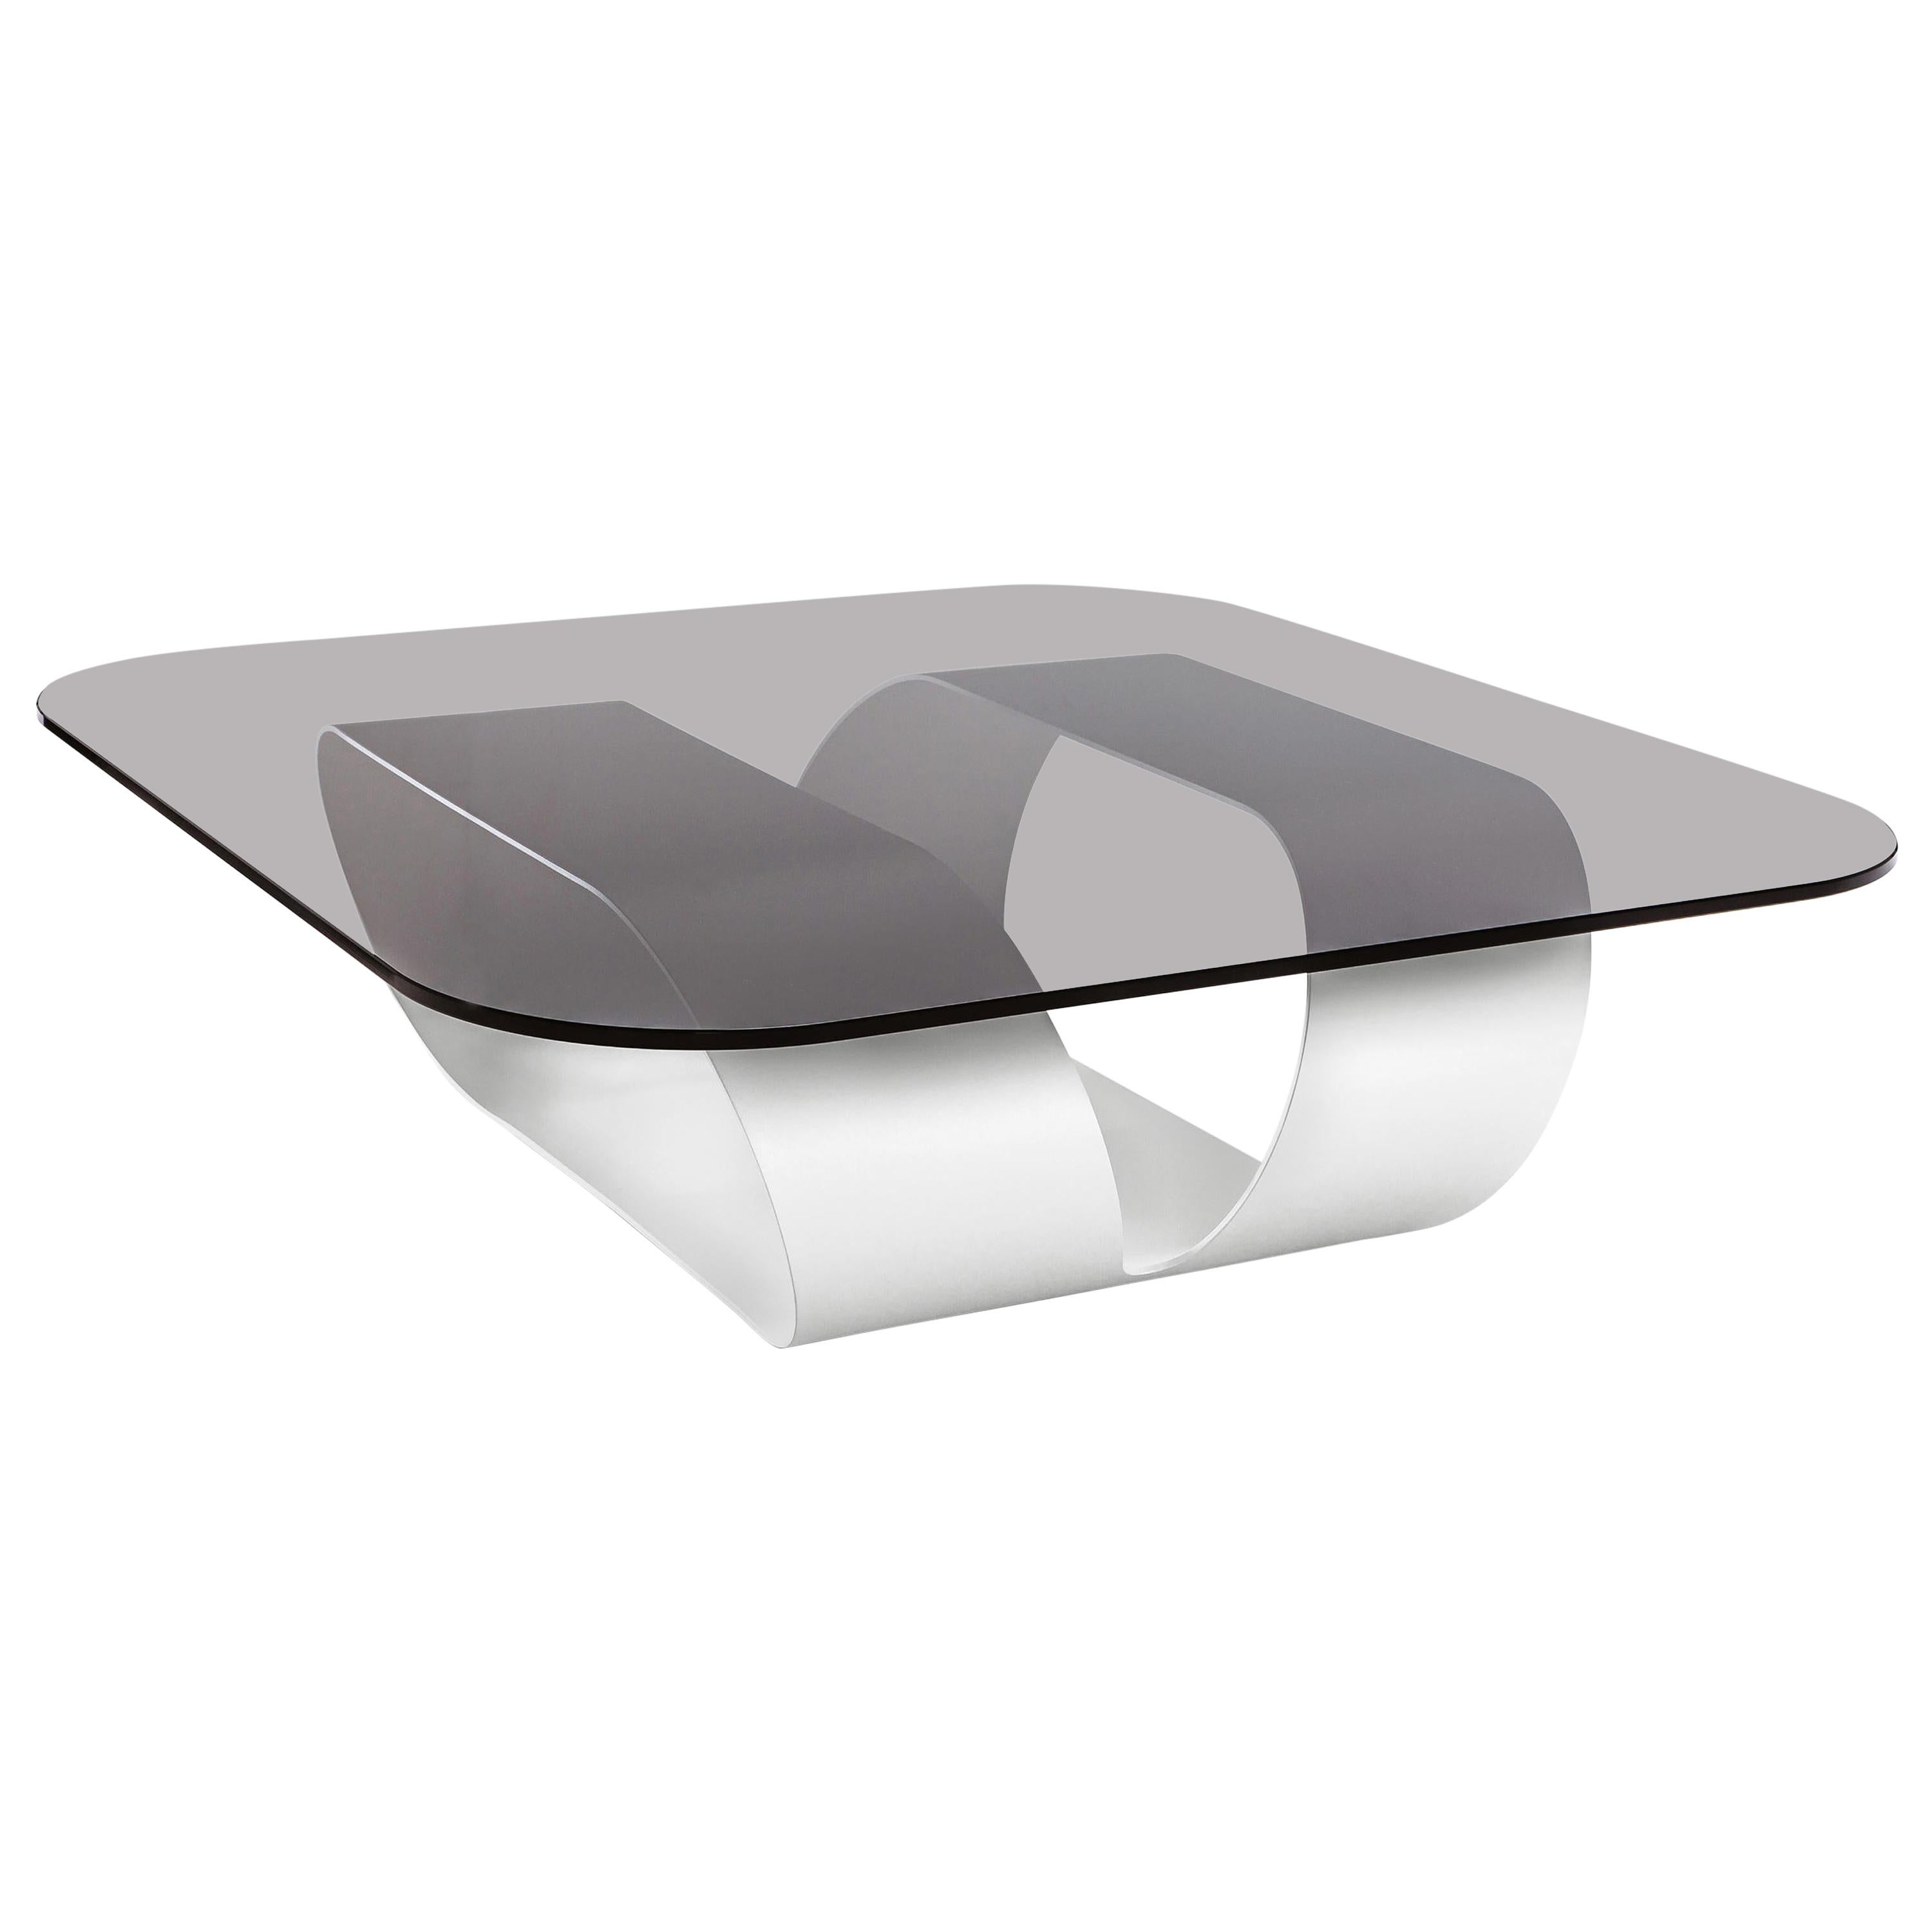 White Ring Glass Coffee Table, Designed by Gianluigi Landoni, Made in Italy